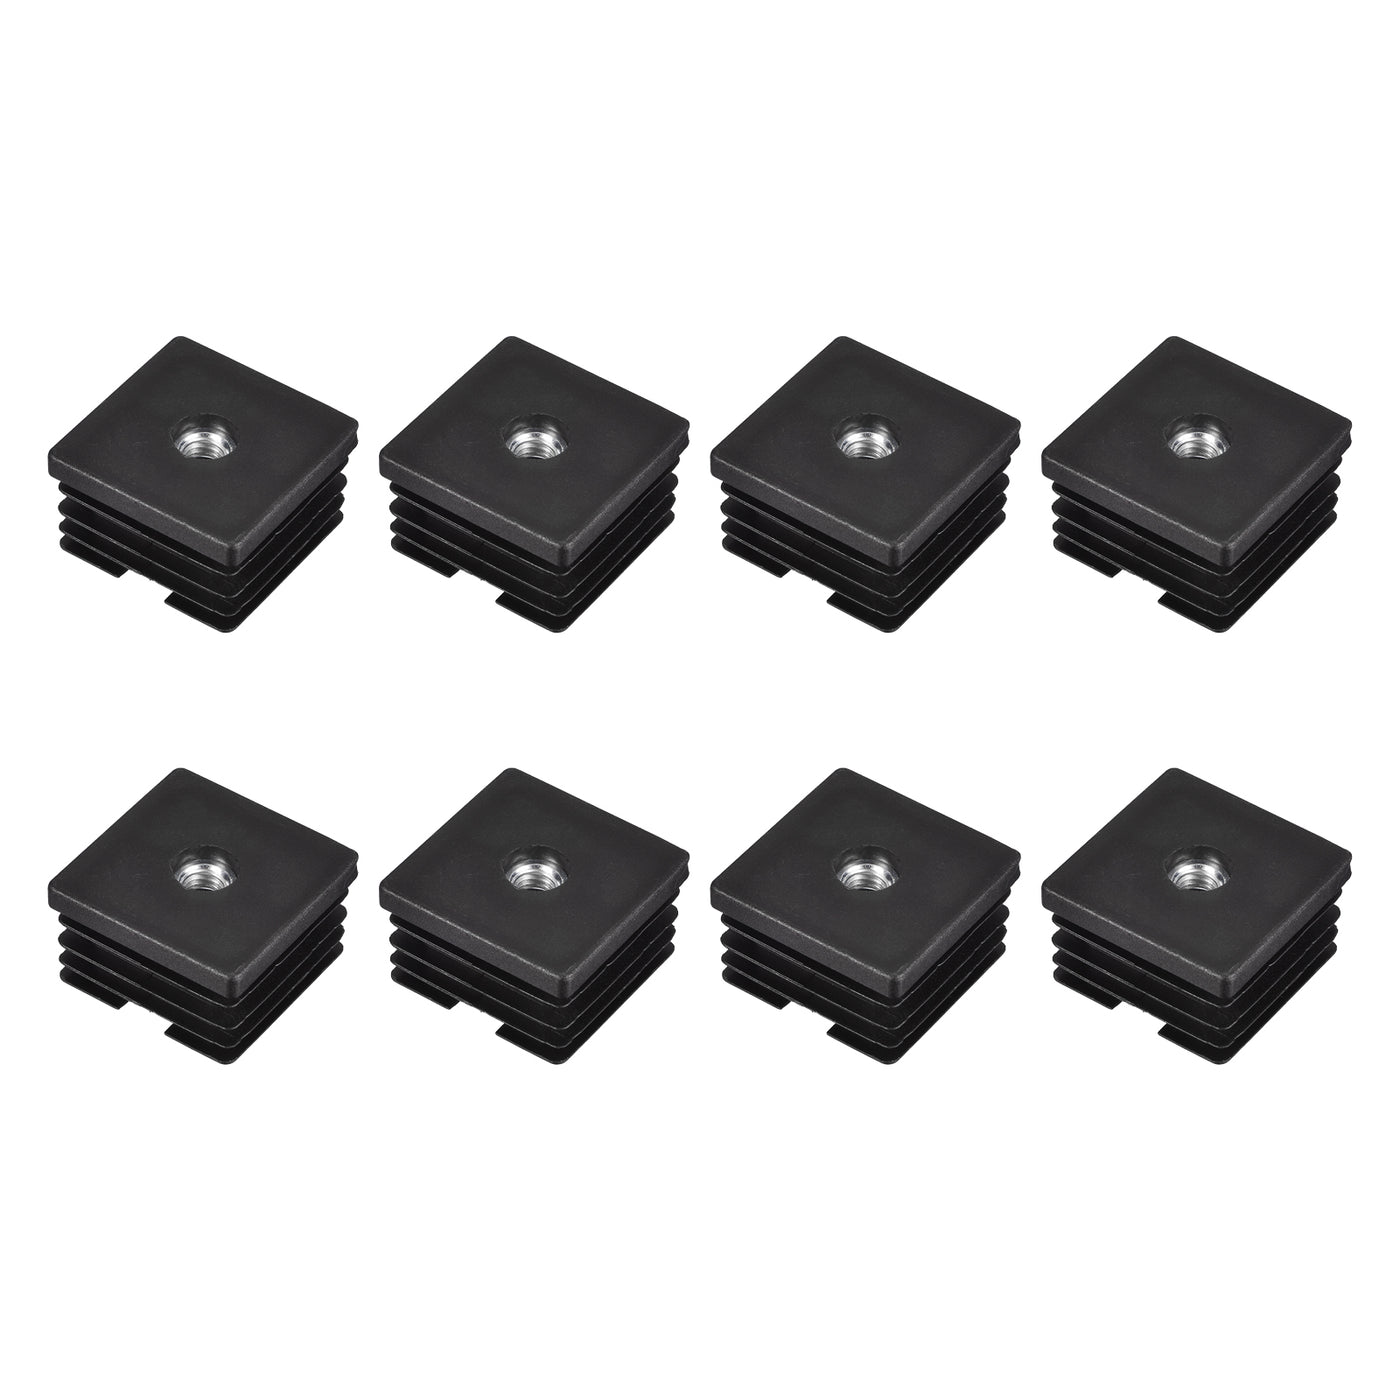 uxcell Uxcell 8Pcs 1.57"x1.57" Caster Insert with Thread, Square M8 Thread for Furniture